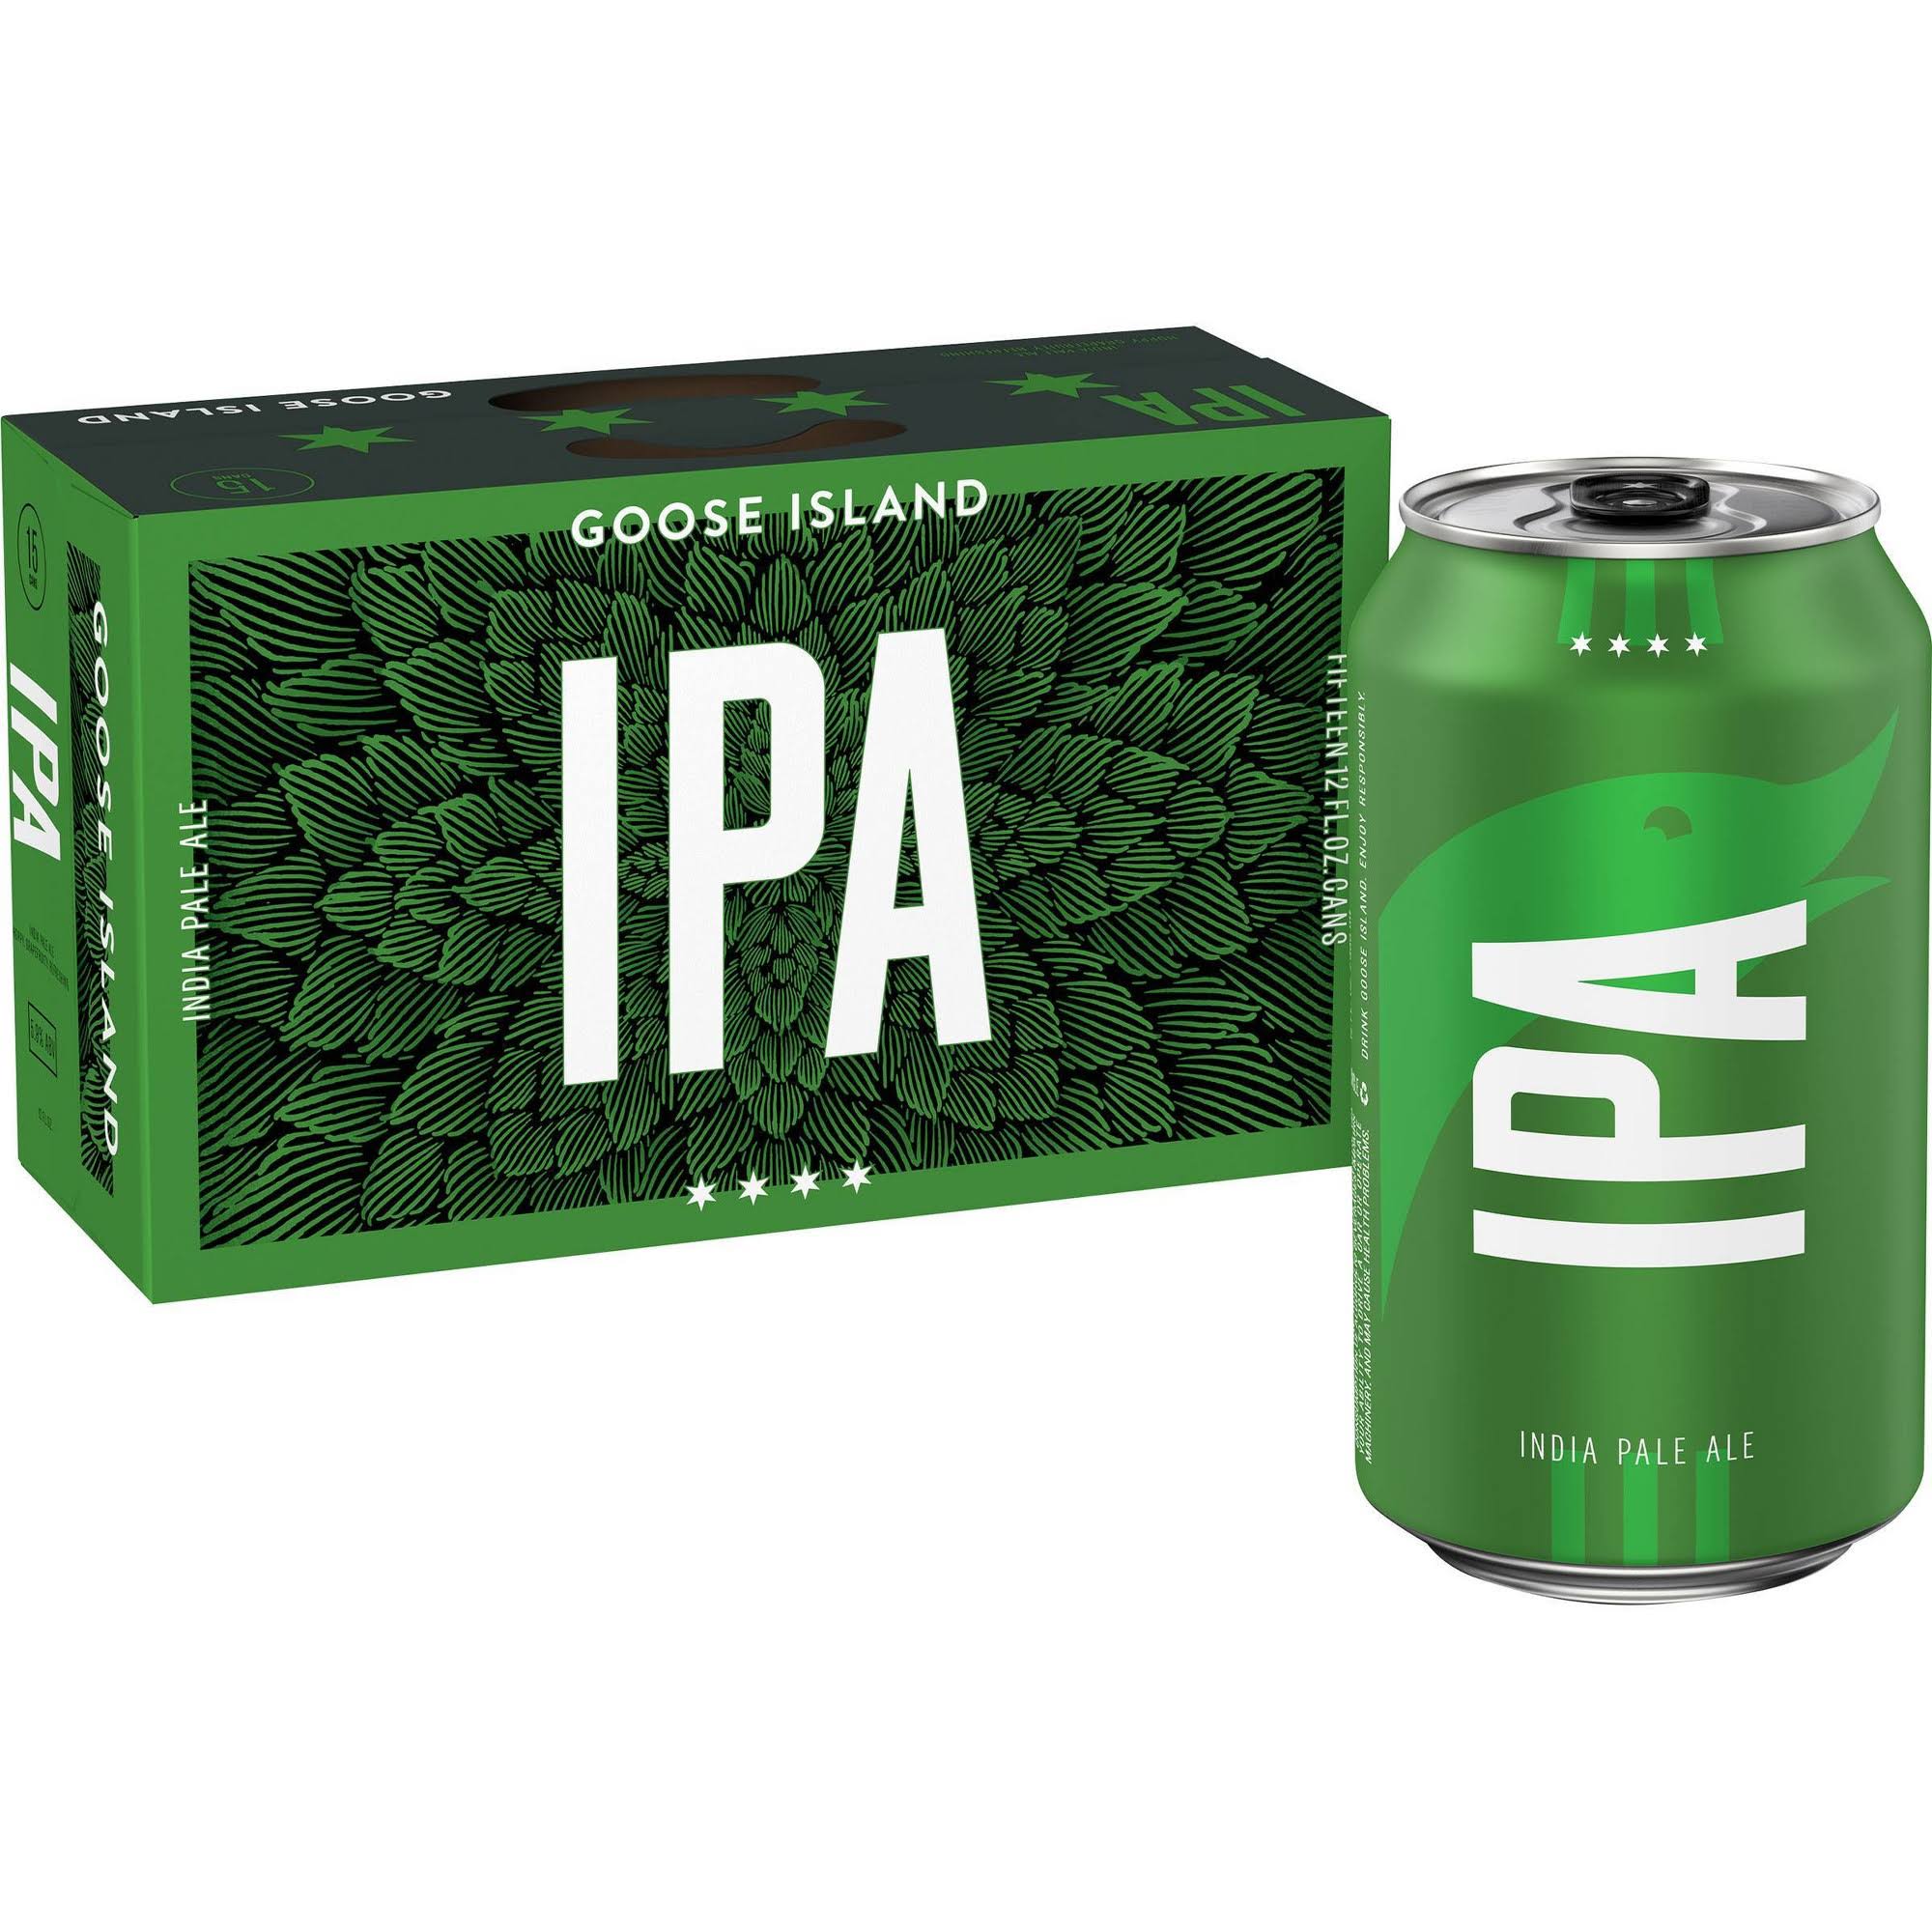 Goose Island Beer, IPA - 15 pack, 12 fl oz cans